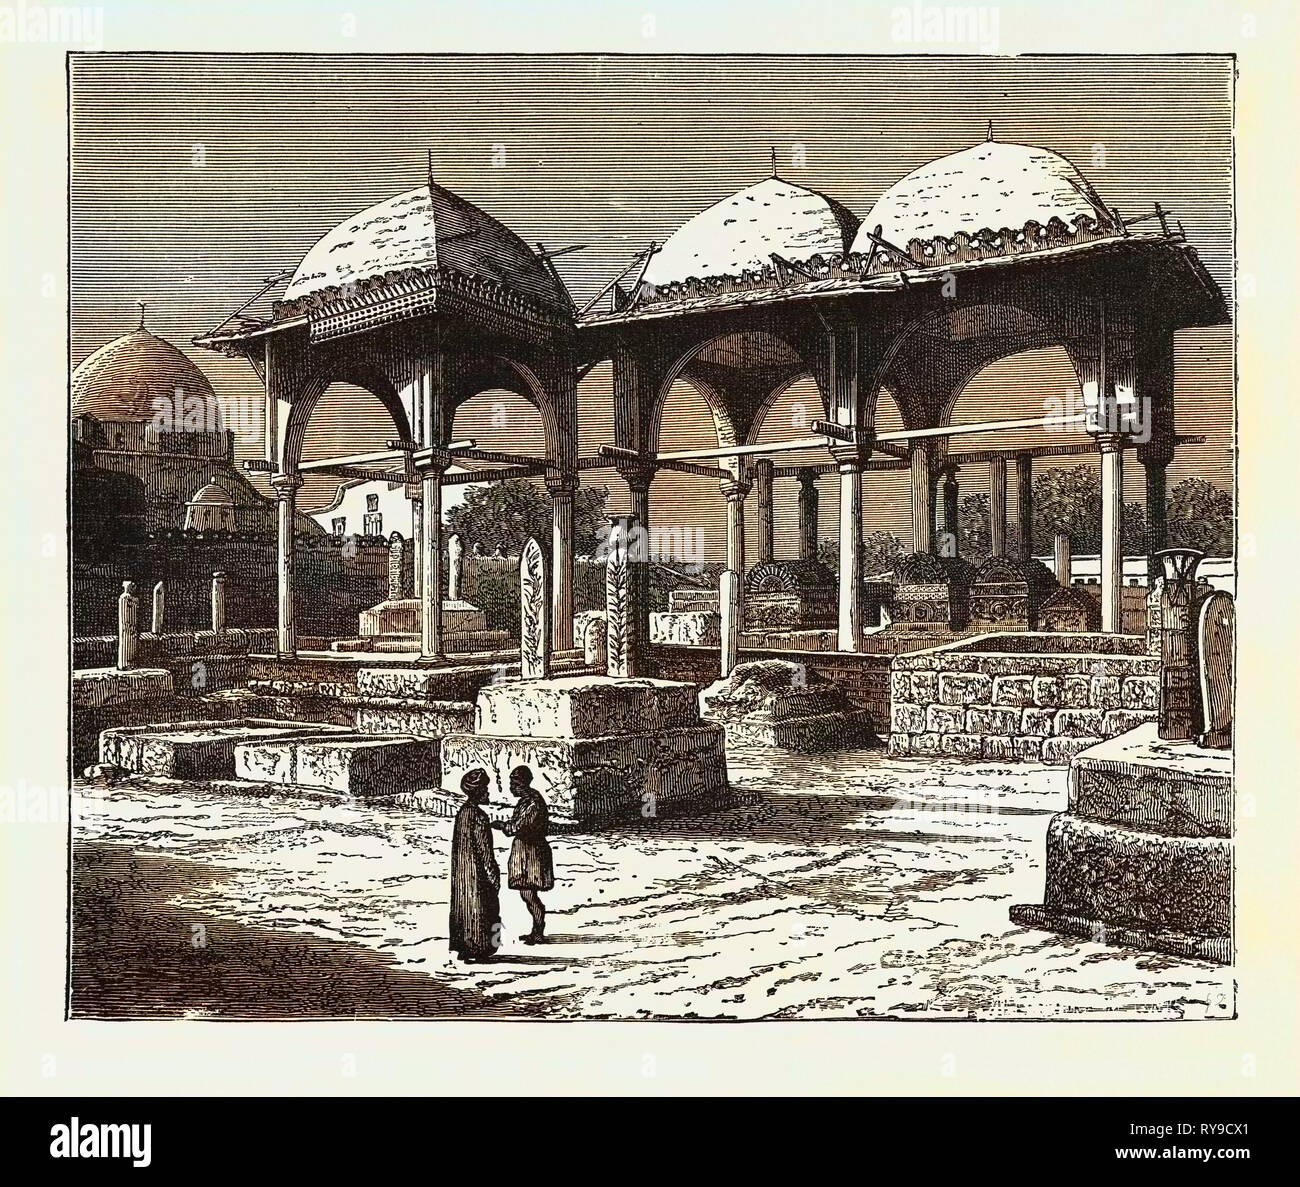 THE TOMBS OF THE MAMELUKES, THE OLD RULERS OF EGYPT, MASSACRED BY MOHAMMED ALI IN 1811. Mamluk, mamlouk, mamluq, mamluke, mameluk, mameluke, mamaluke or marmeluke: is a military caste in medieval Egypt, composed of non-Arab origin people, mainly of Kipchaks Stock Photo